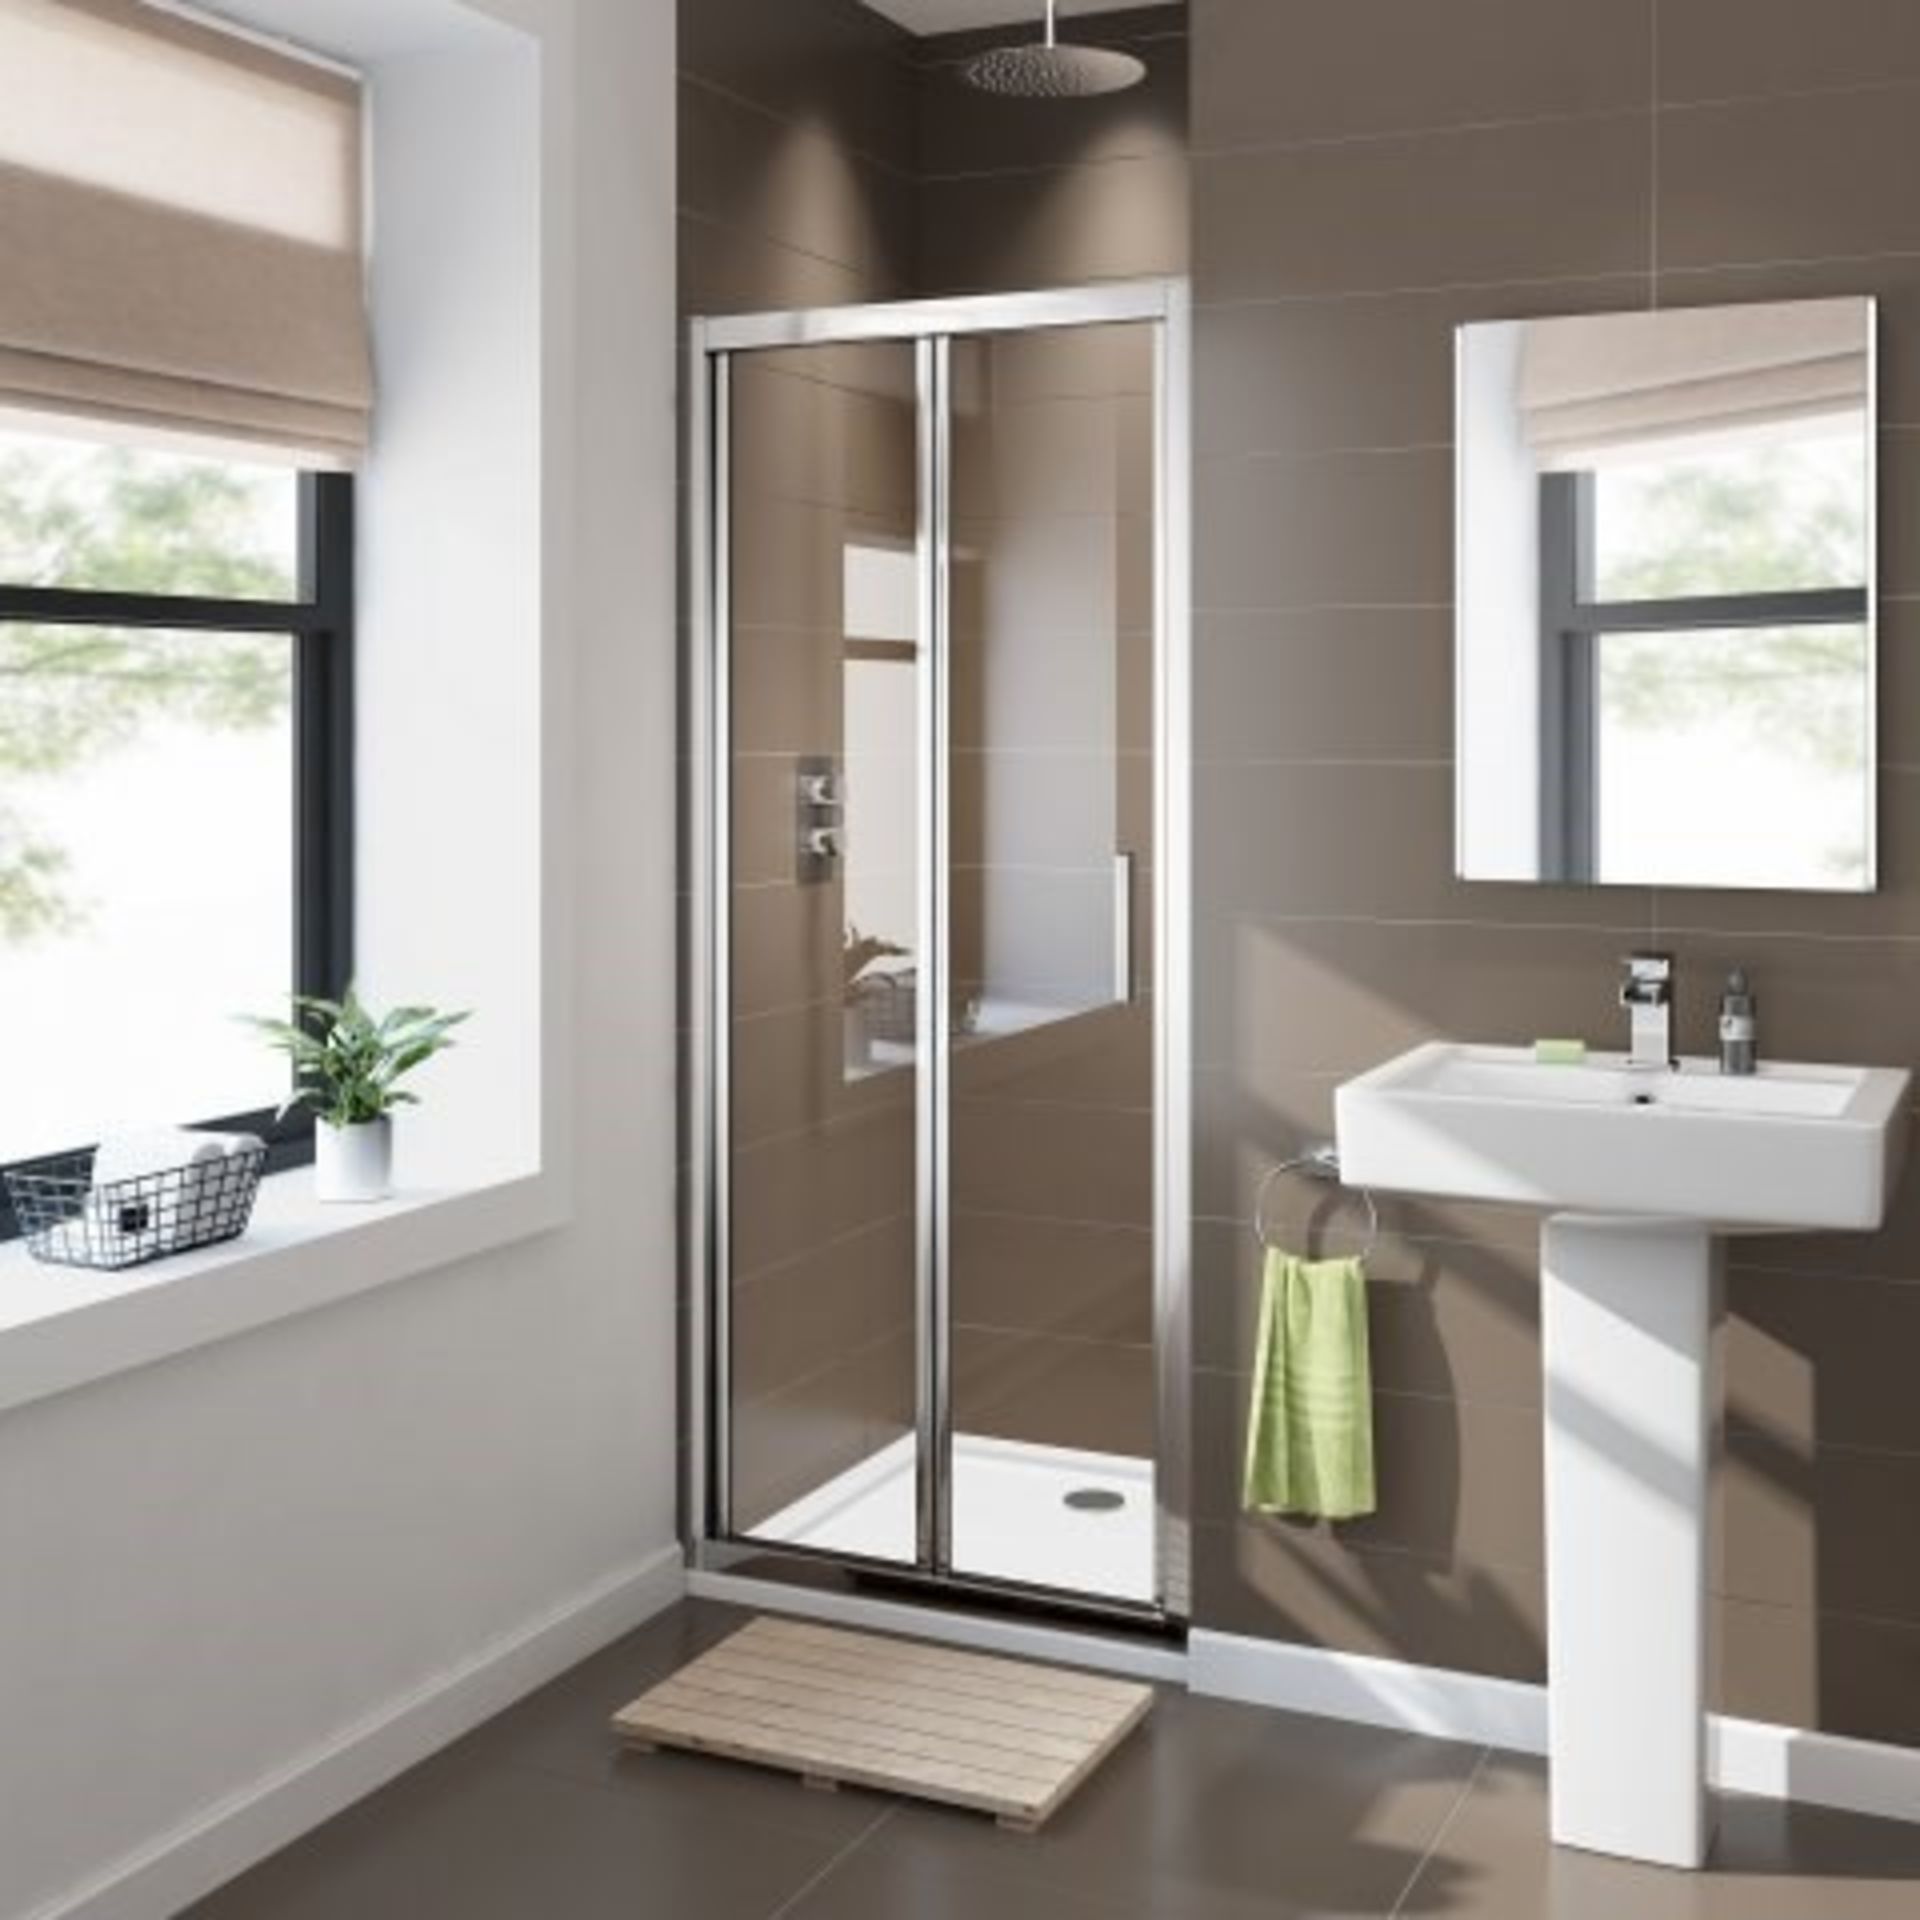 NEW (M19) 760mm - 8mm - Premium EasyClean Bifold Shower Door. RRP £379.99.Durability to withs... - Image 3 of 3